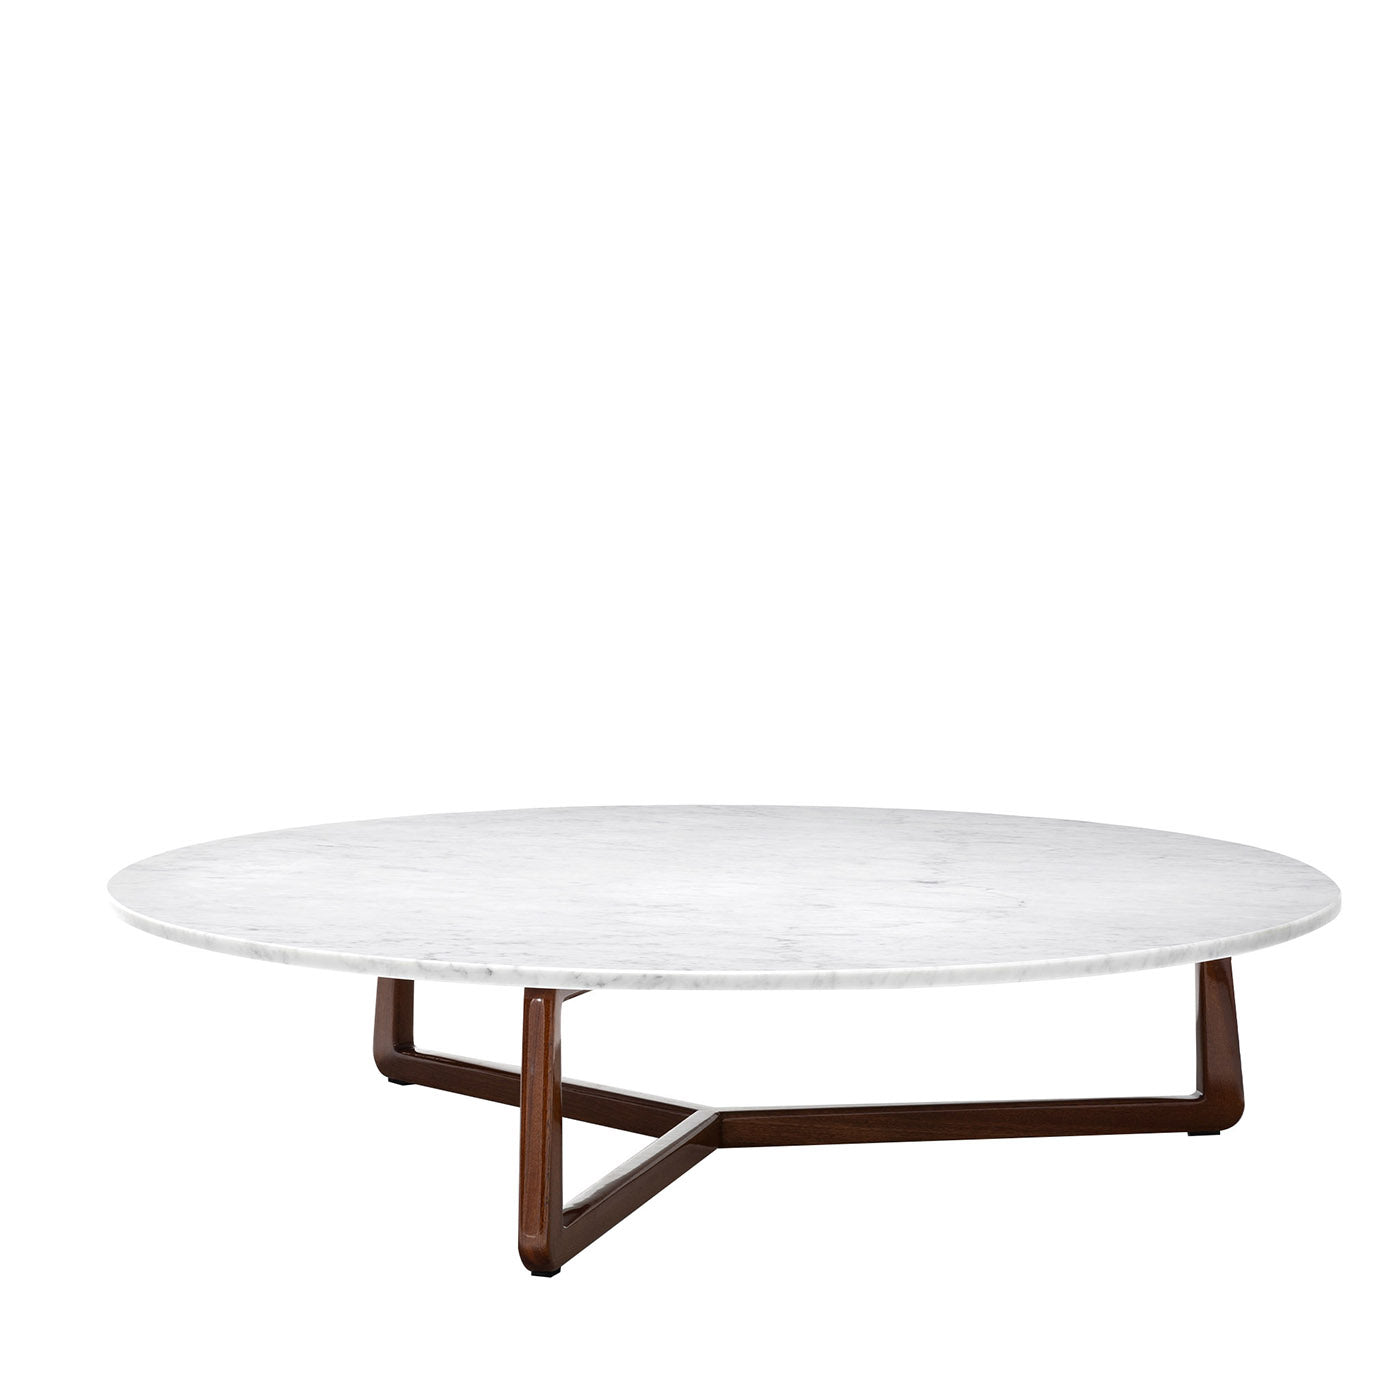 Sunset Round Lucido Mediterraneo + Carrara Coffee Table by Paola Navone - Main view